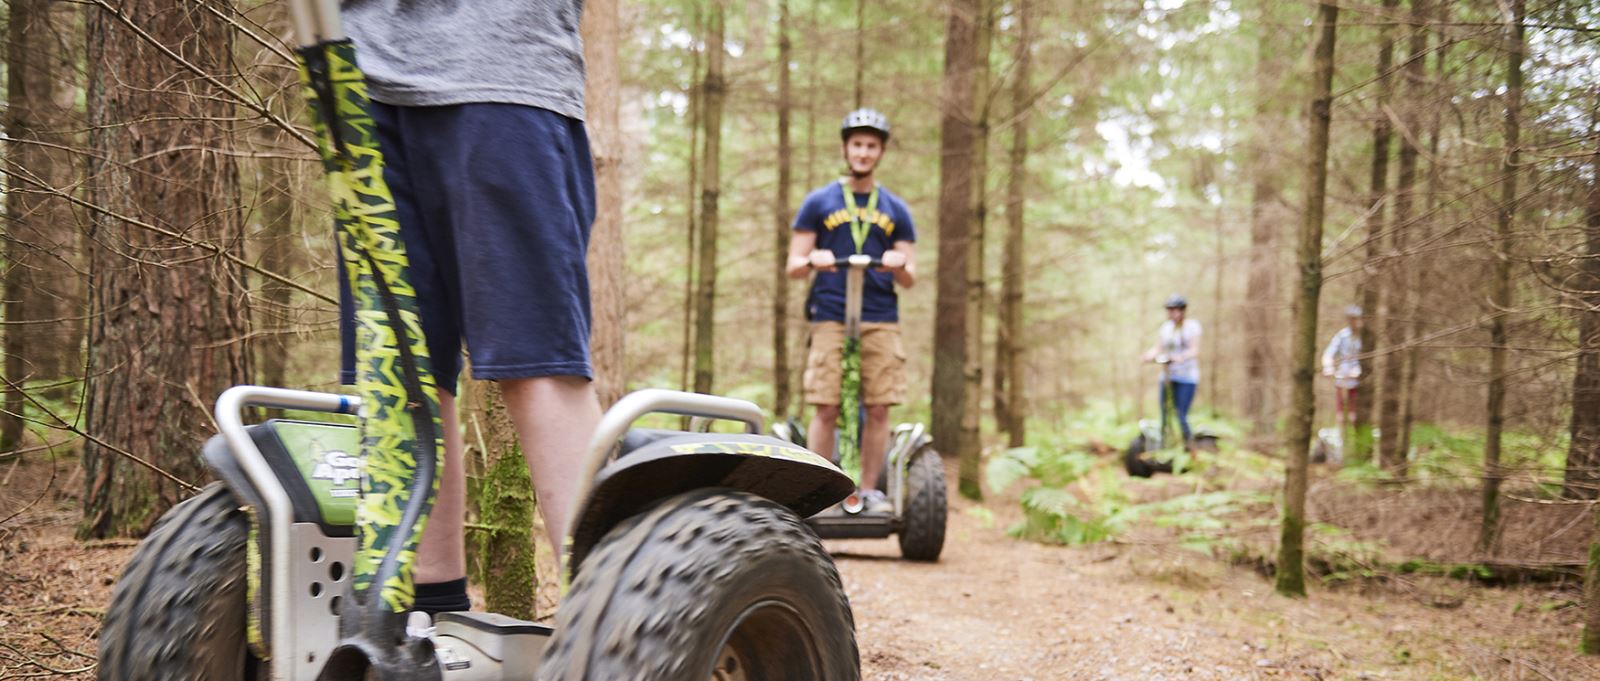 Segway at Moors Valley Country Park